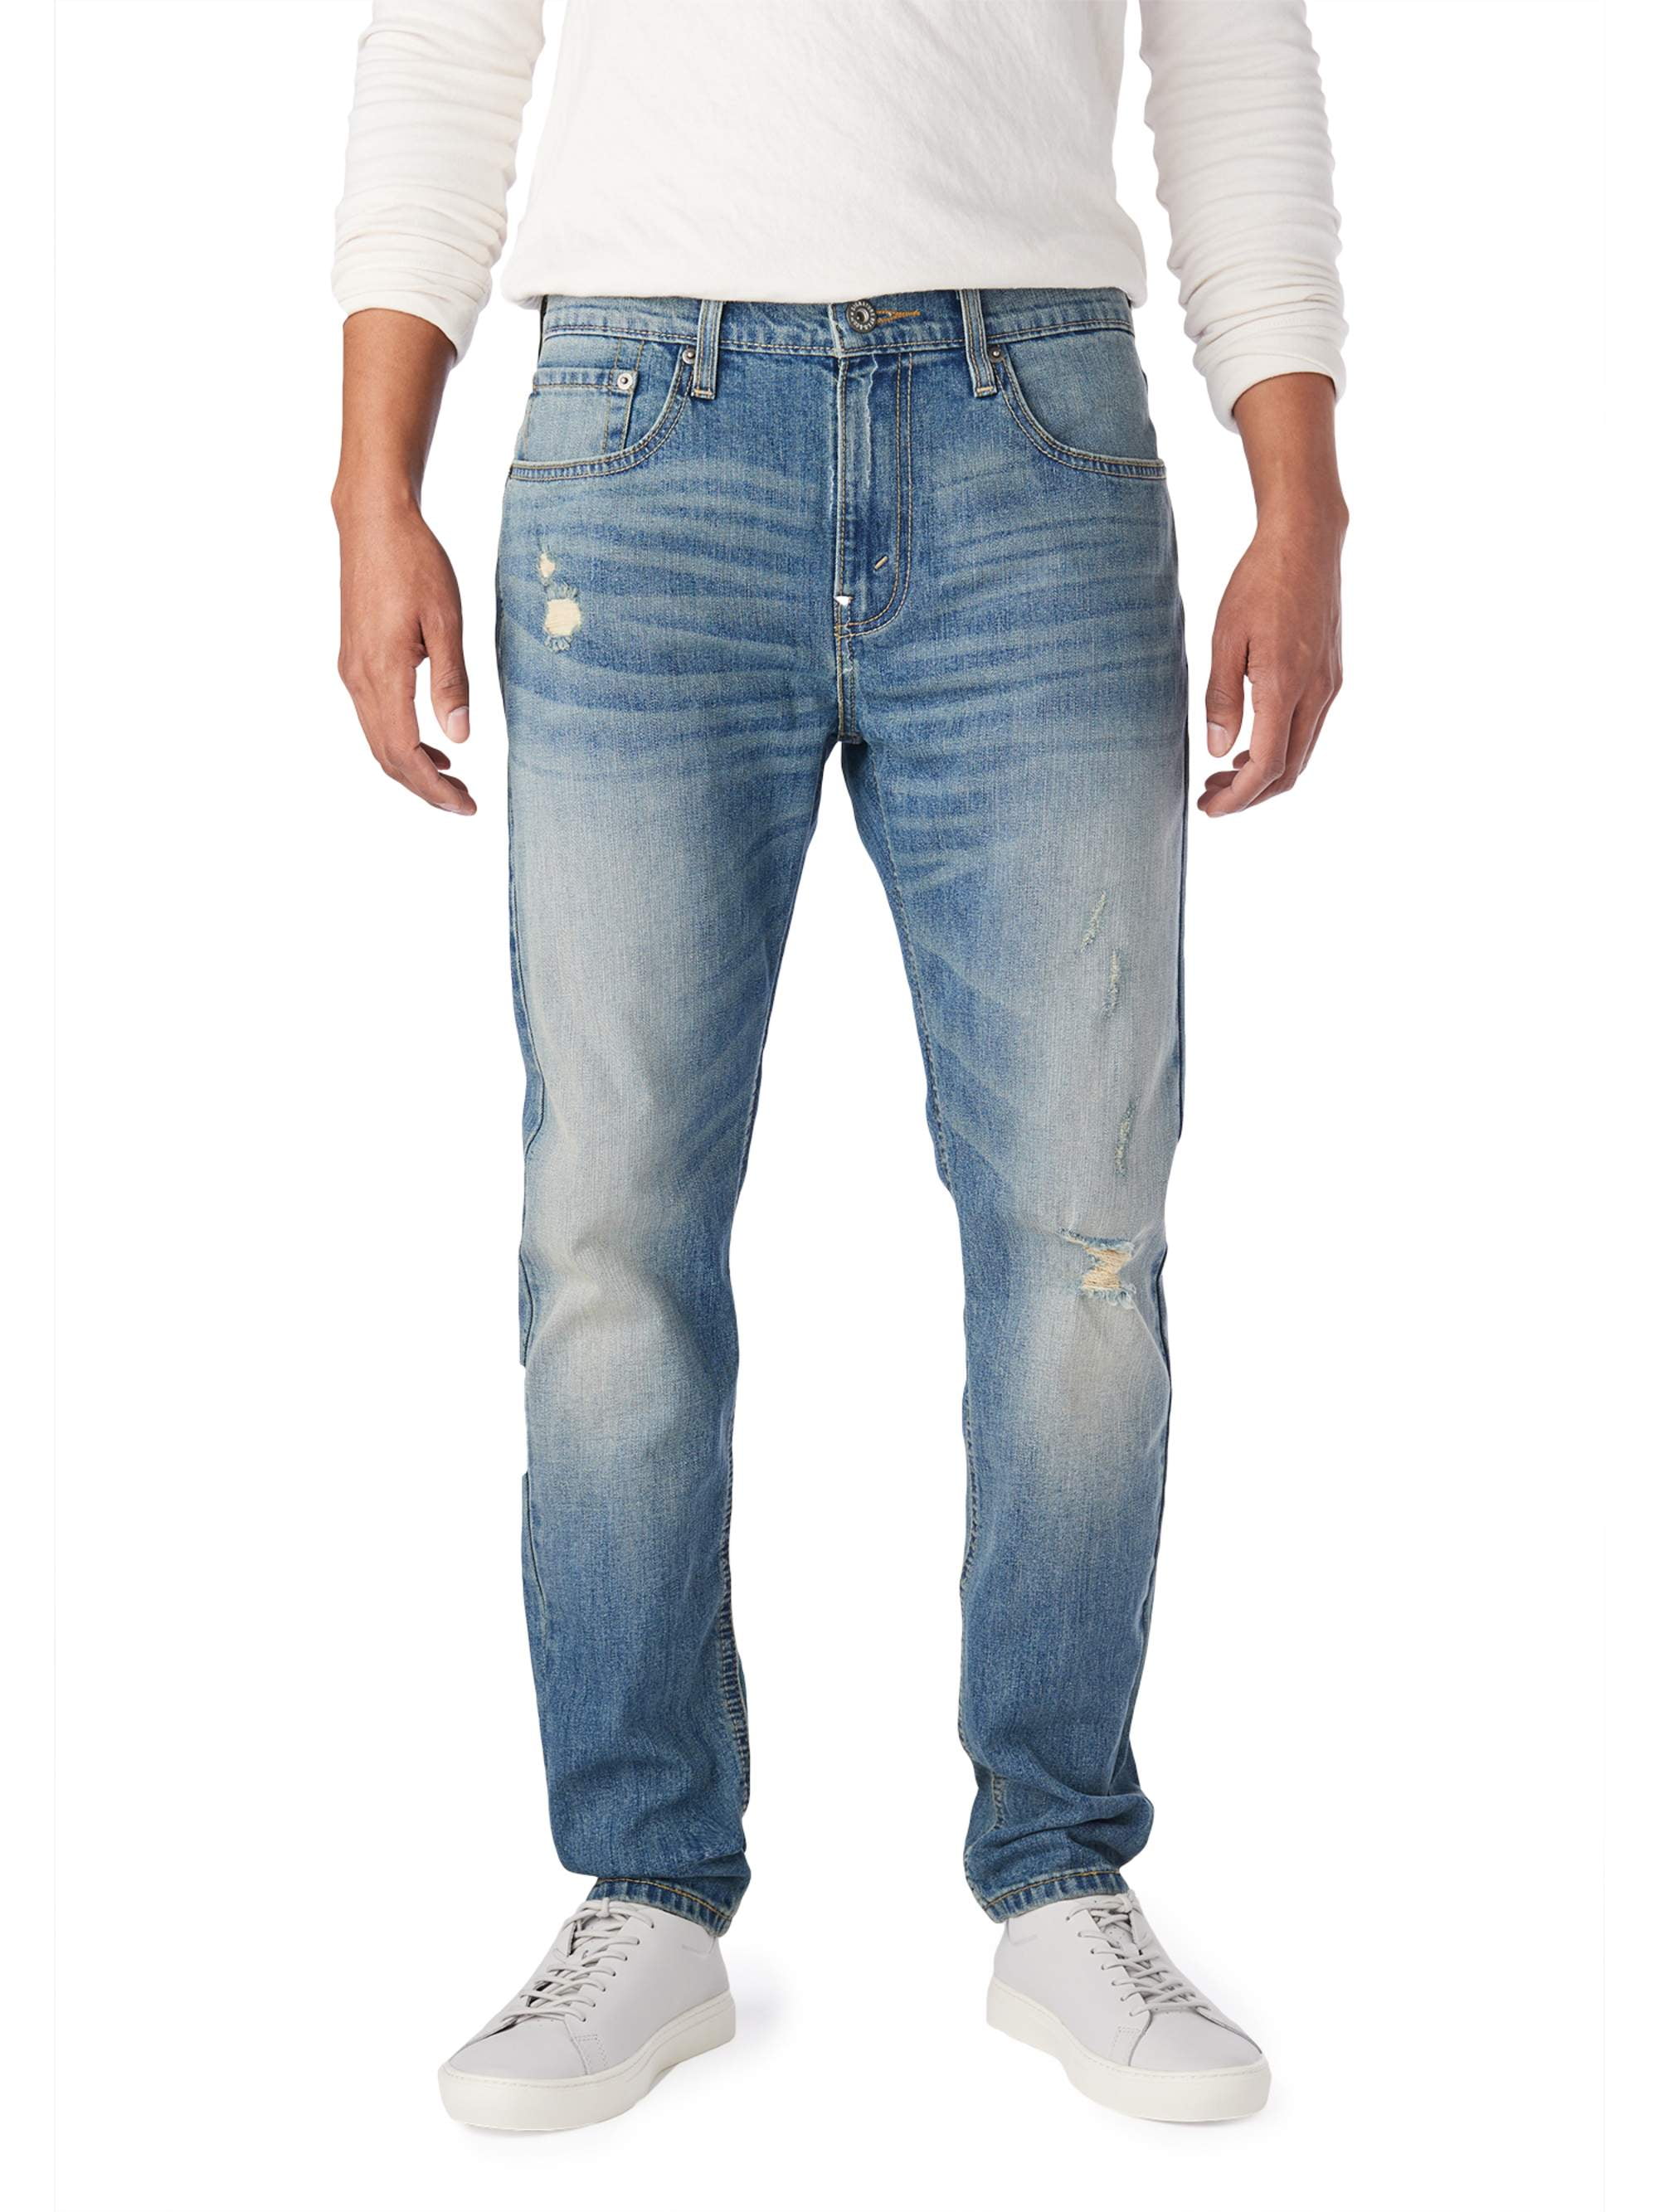 New Mens Signature by Levii Strauss Skinny Flex Modern Fit Jeans 